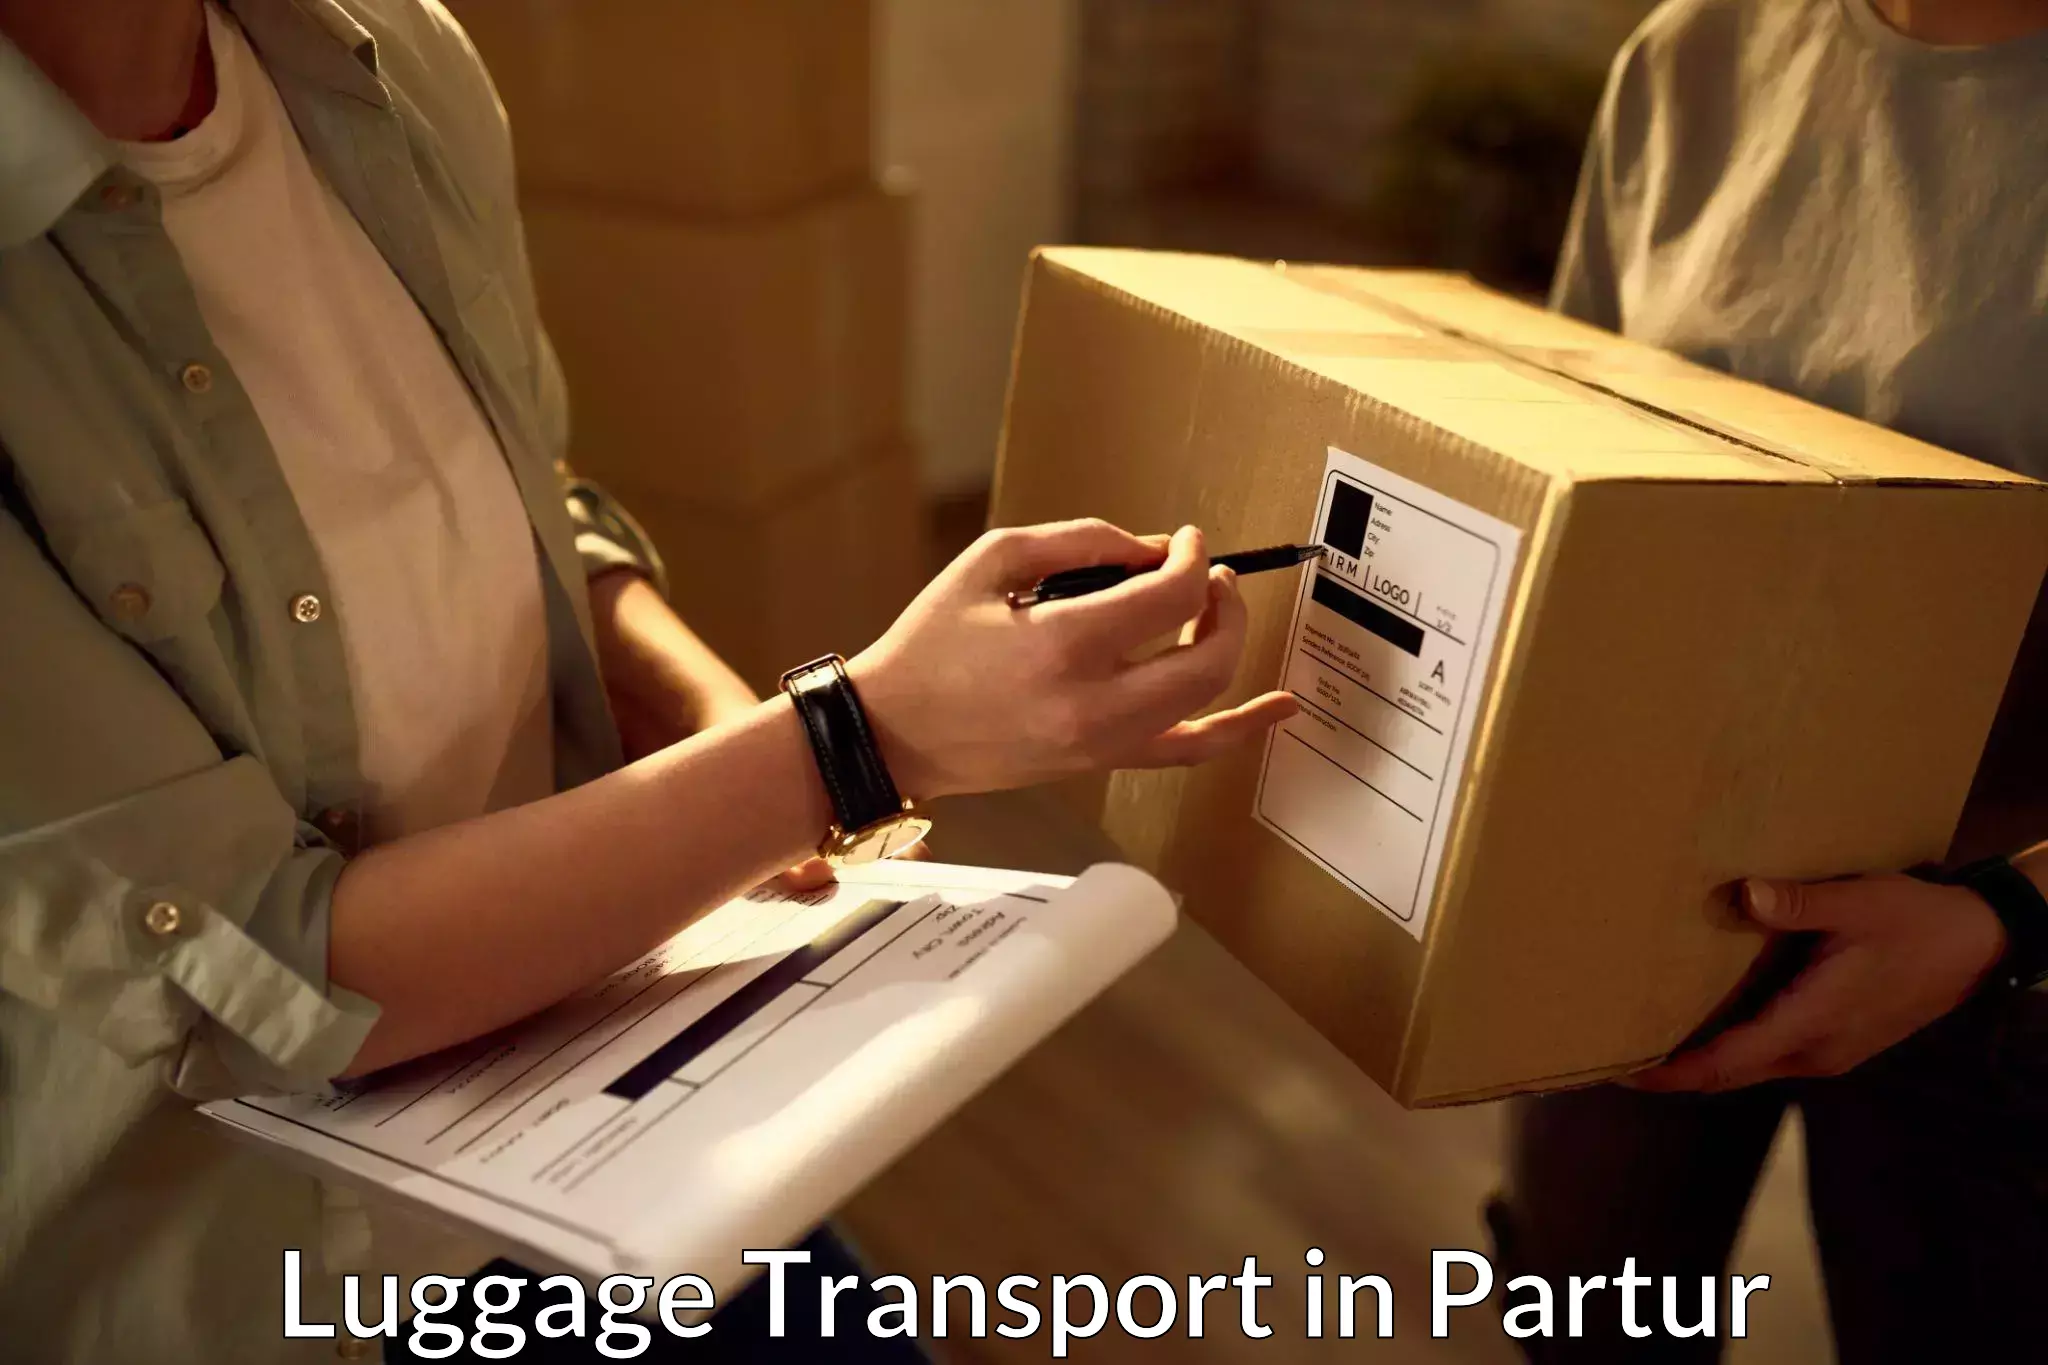 Automated luggage transport in Partur